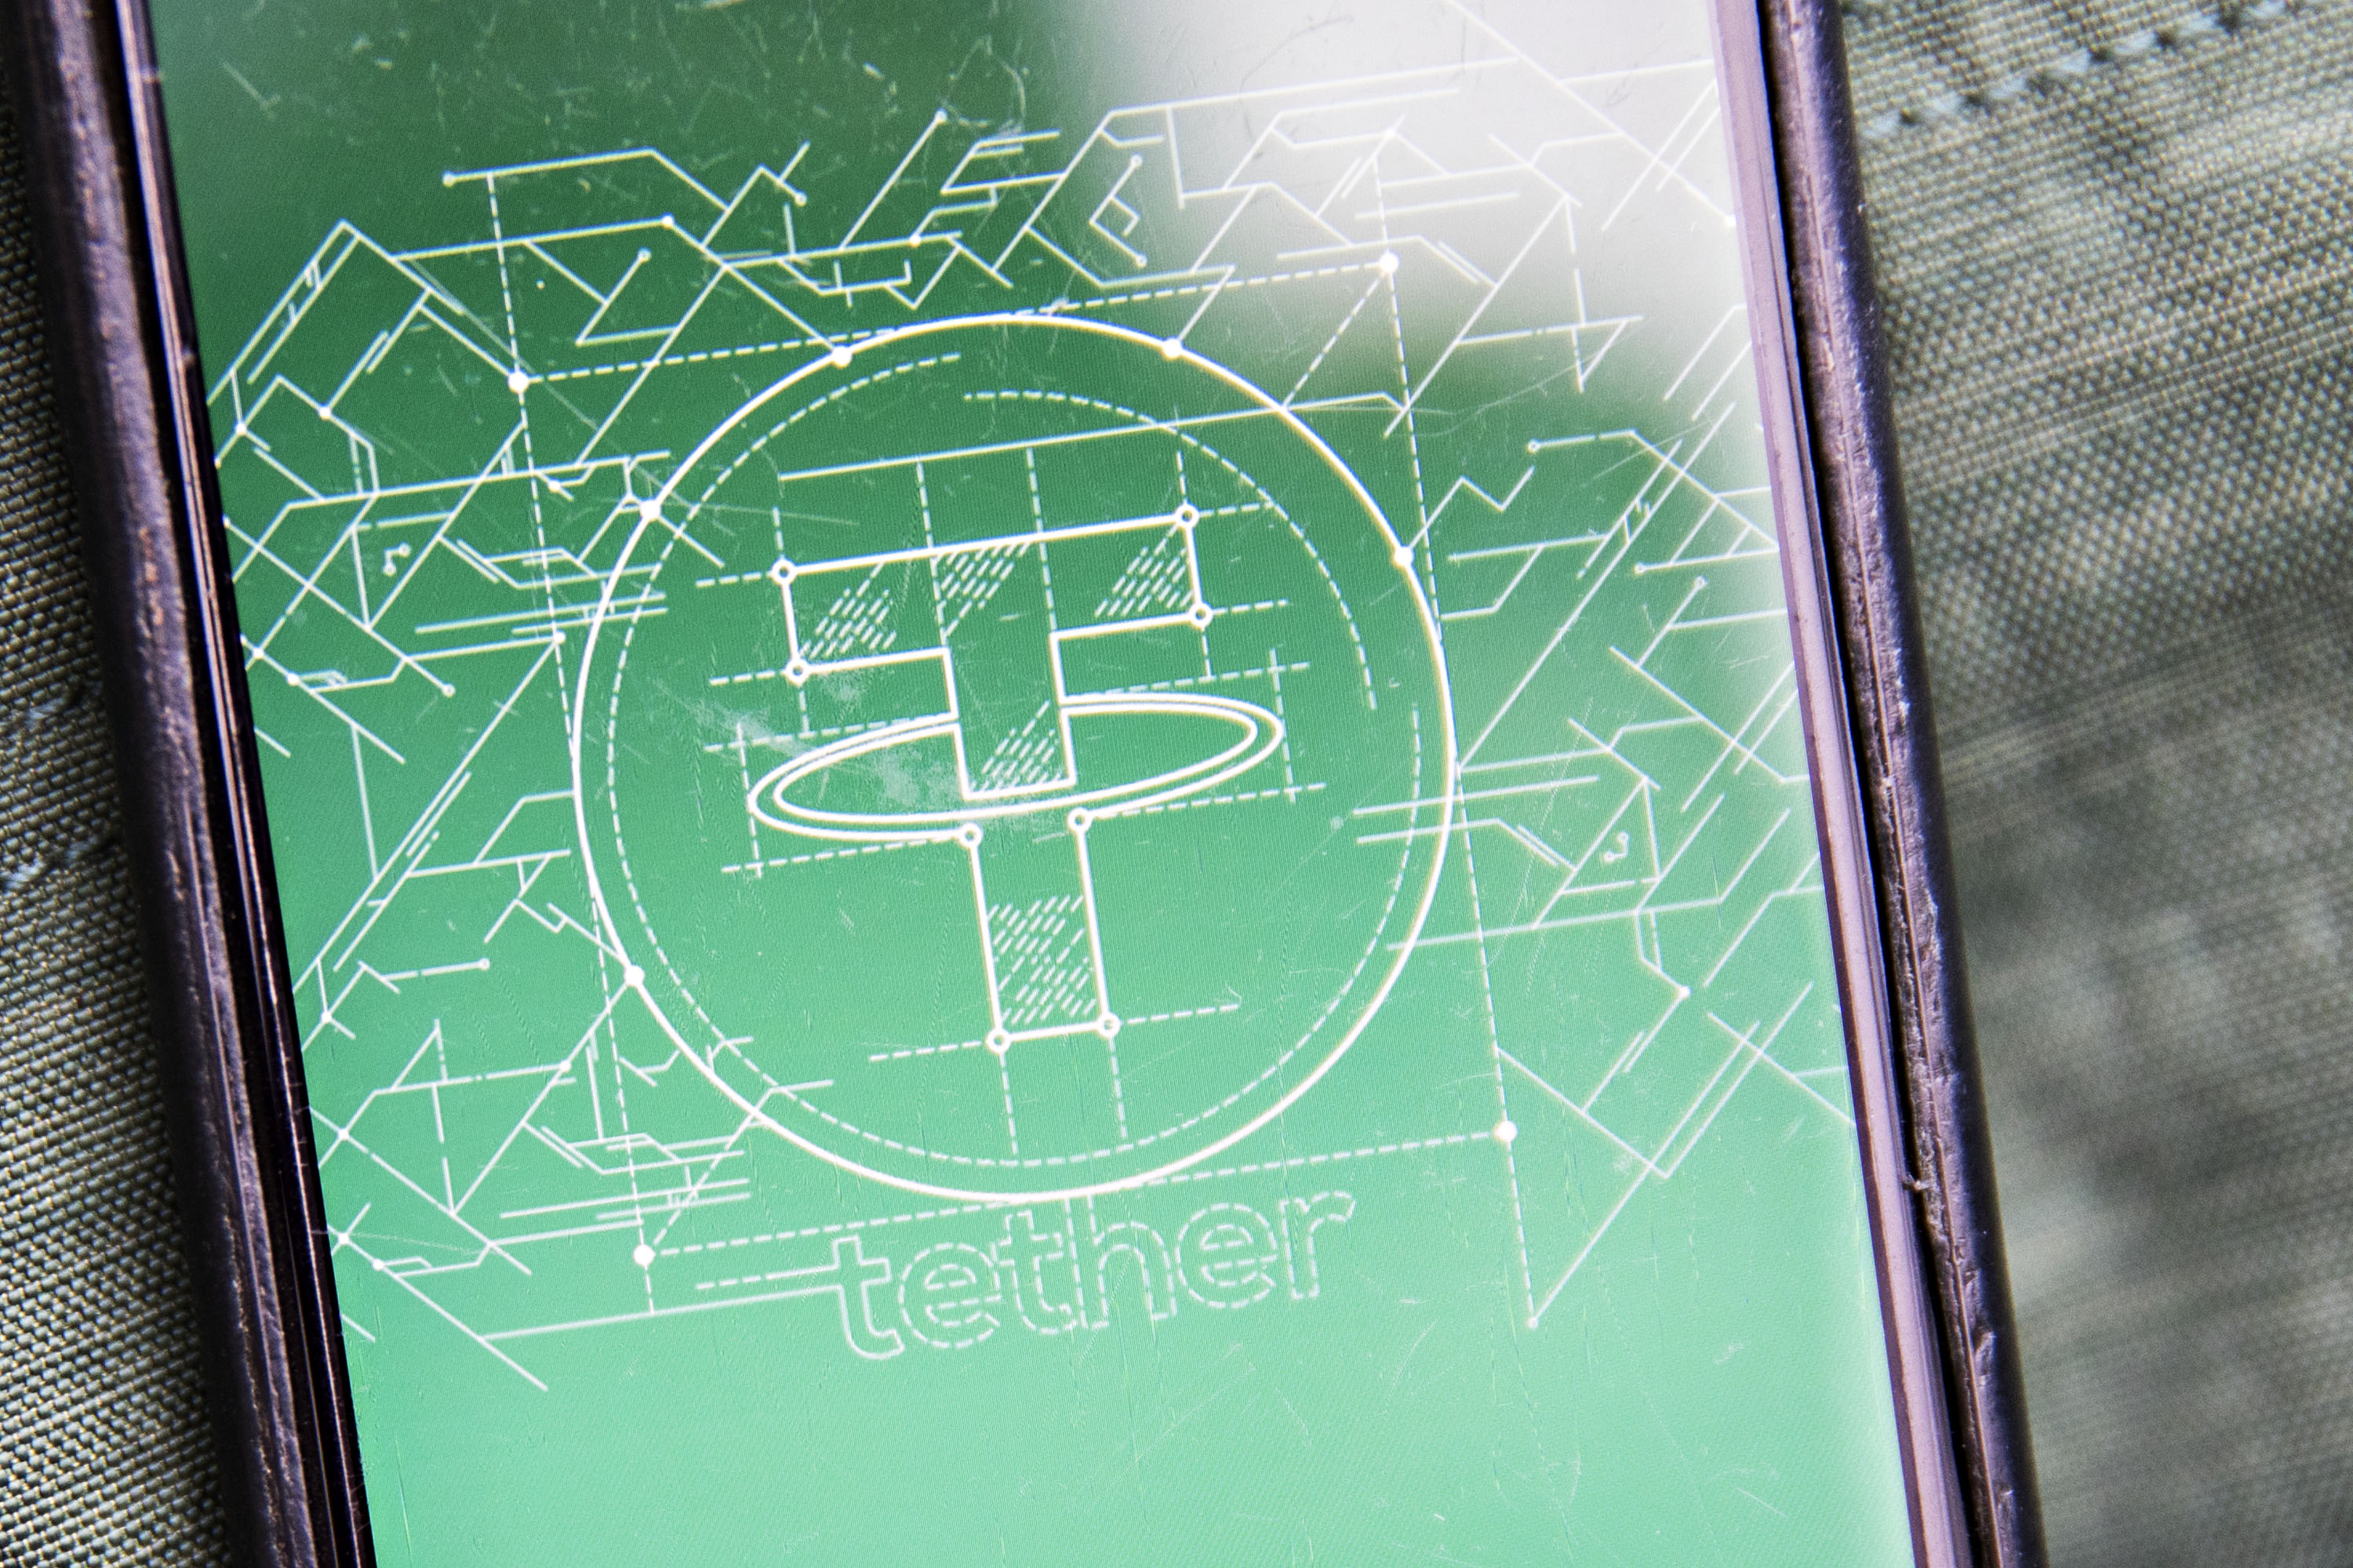 The Tether logo.